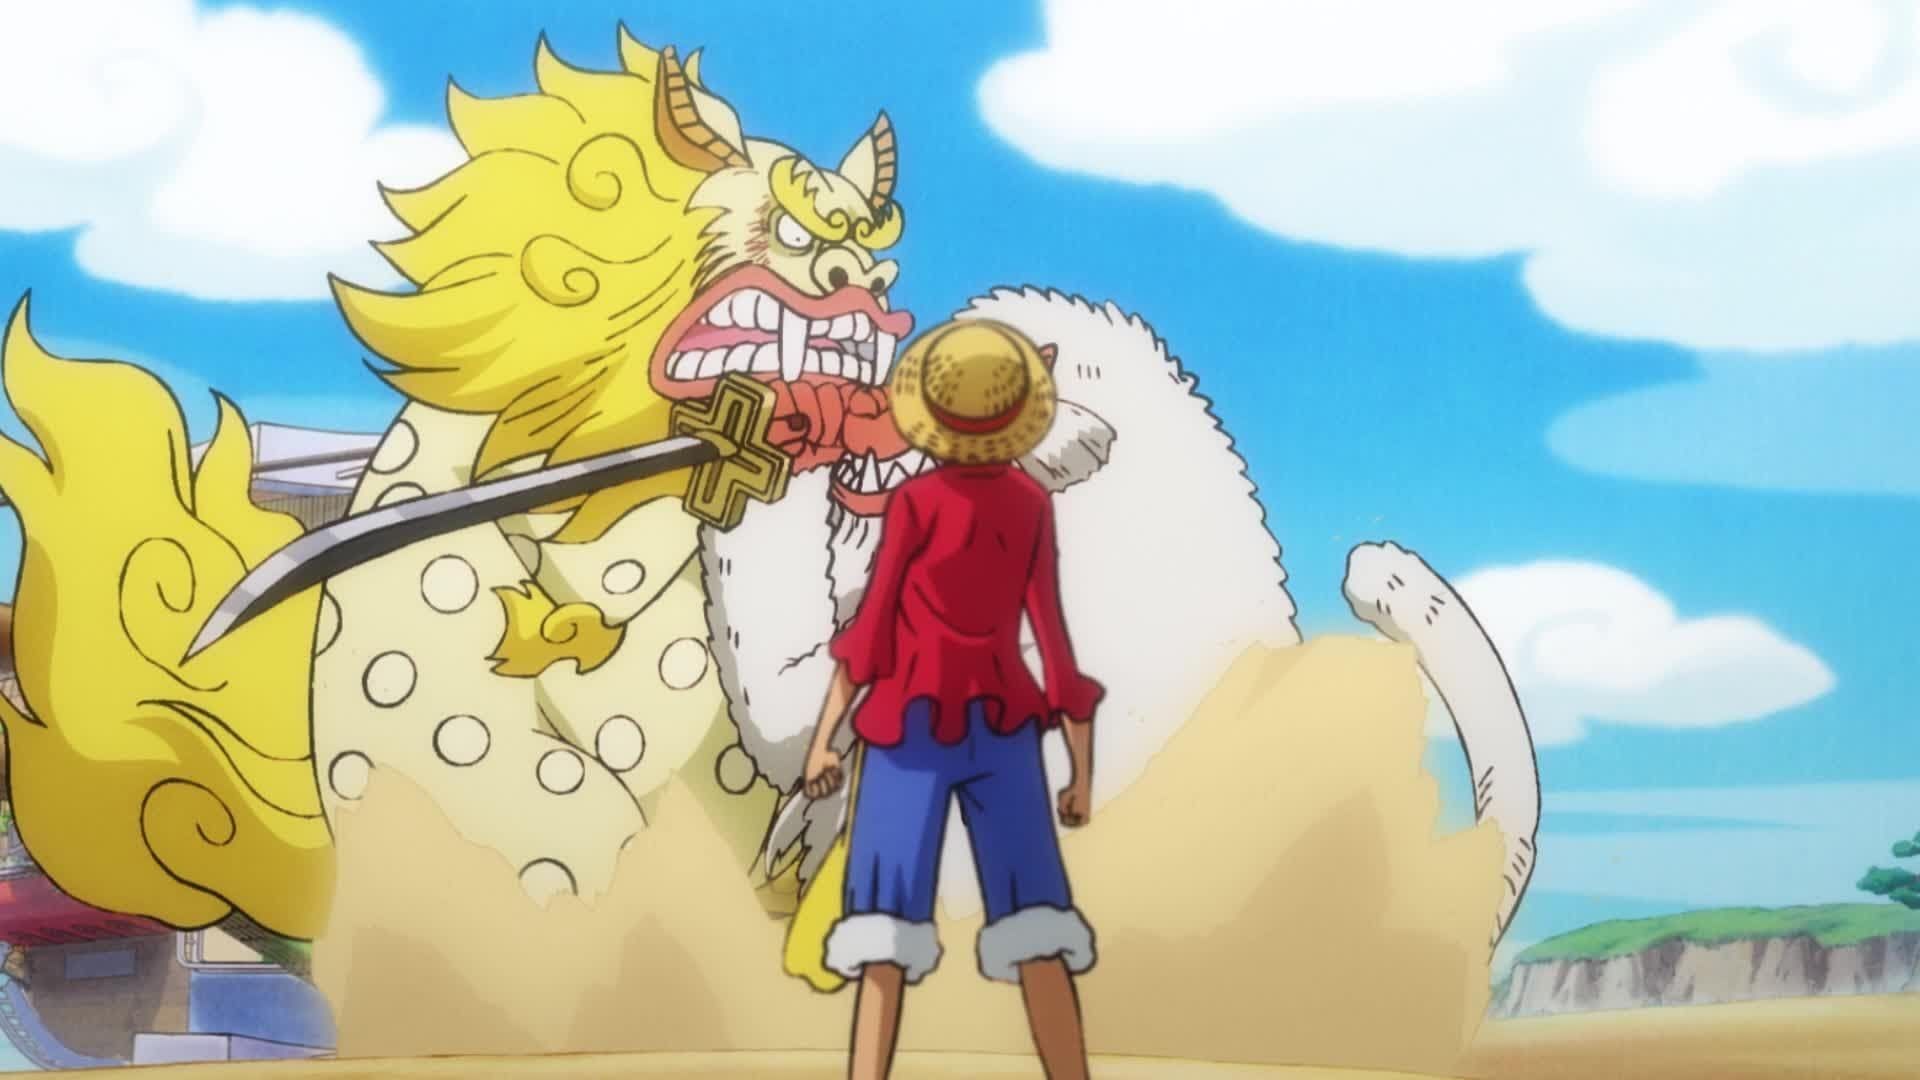 One Piece Episode 954 - Its Name is Enma! Oden's Great Swords!